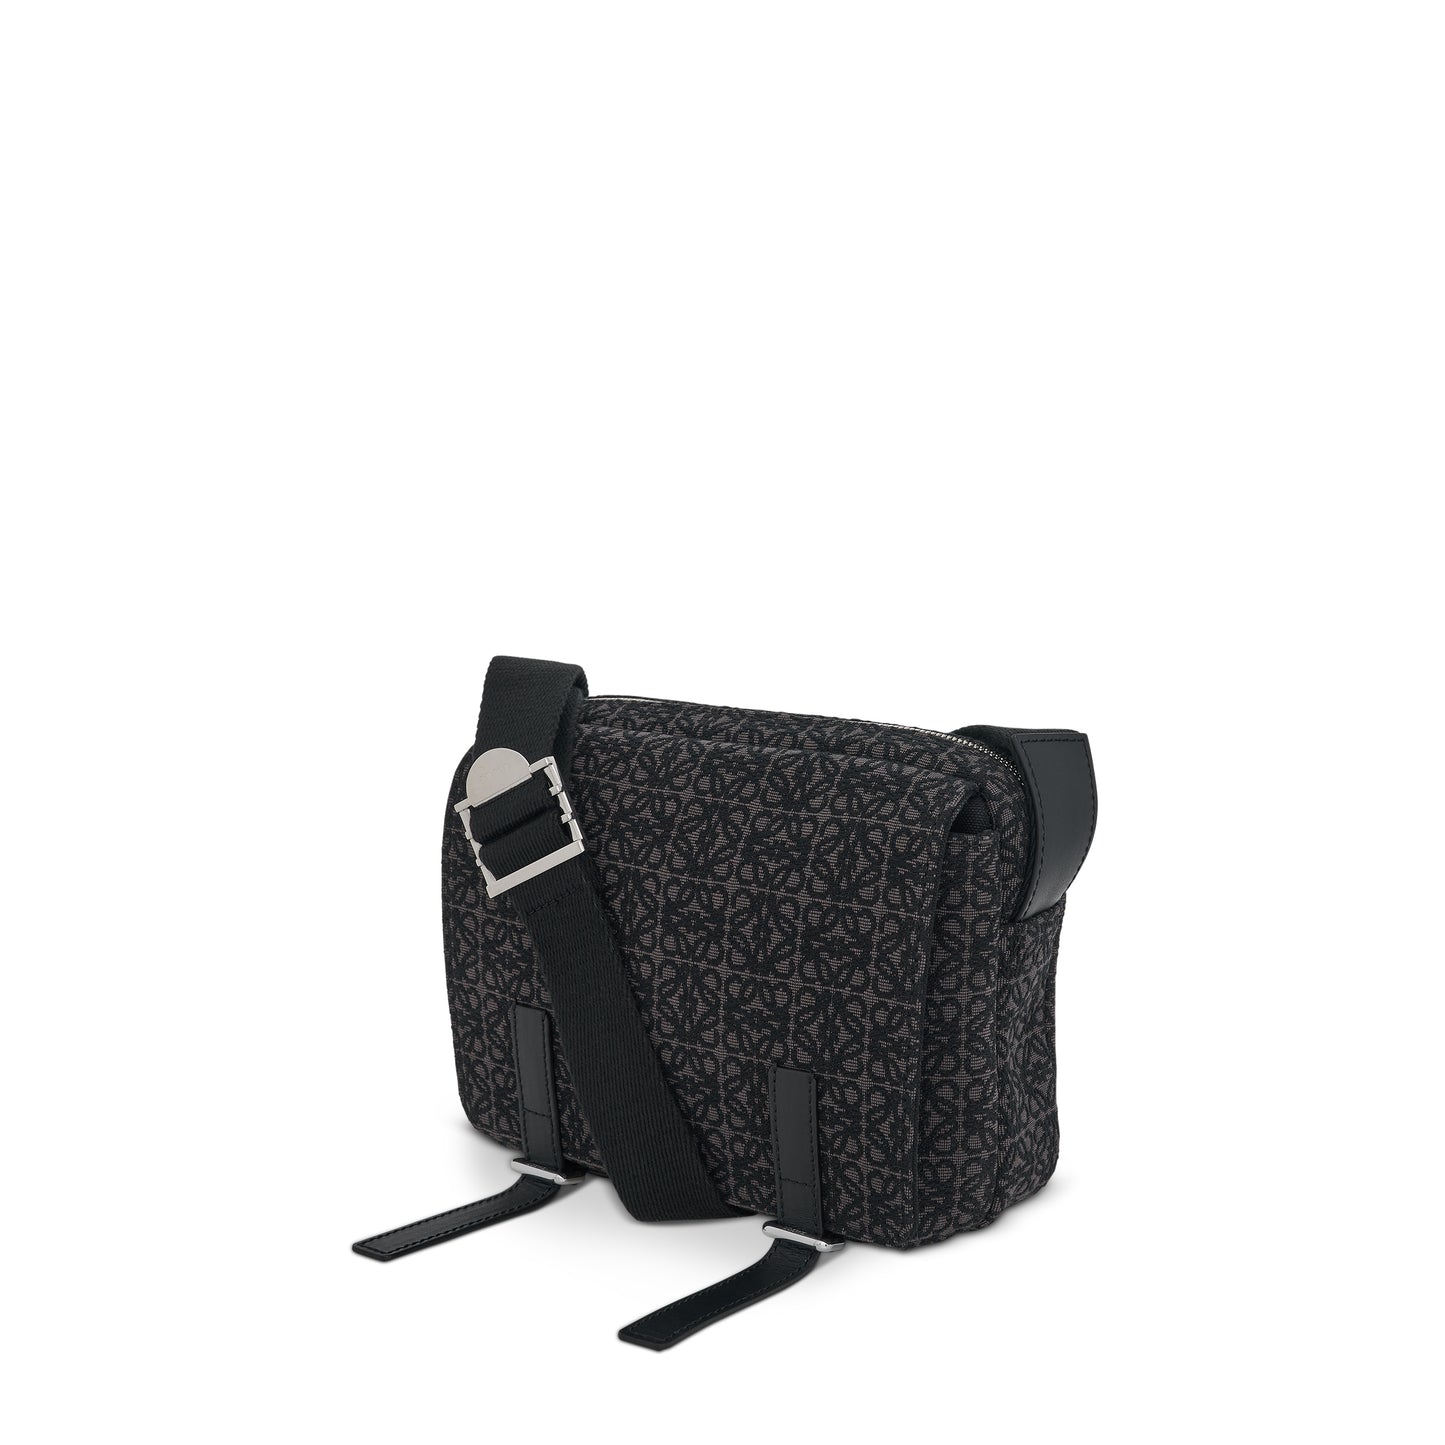 XS Military Messenger Bag in Anagram Jacquard and Calfskin in Anthracite